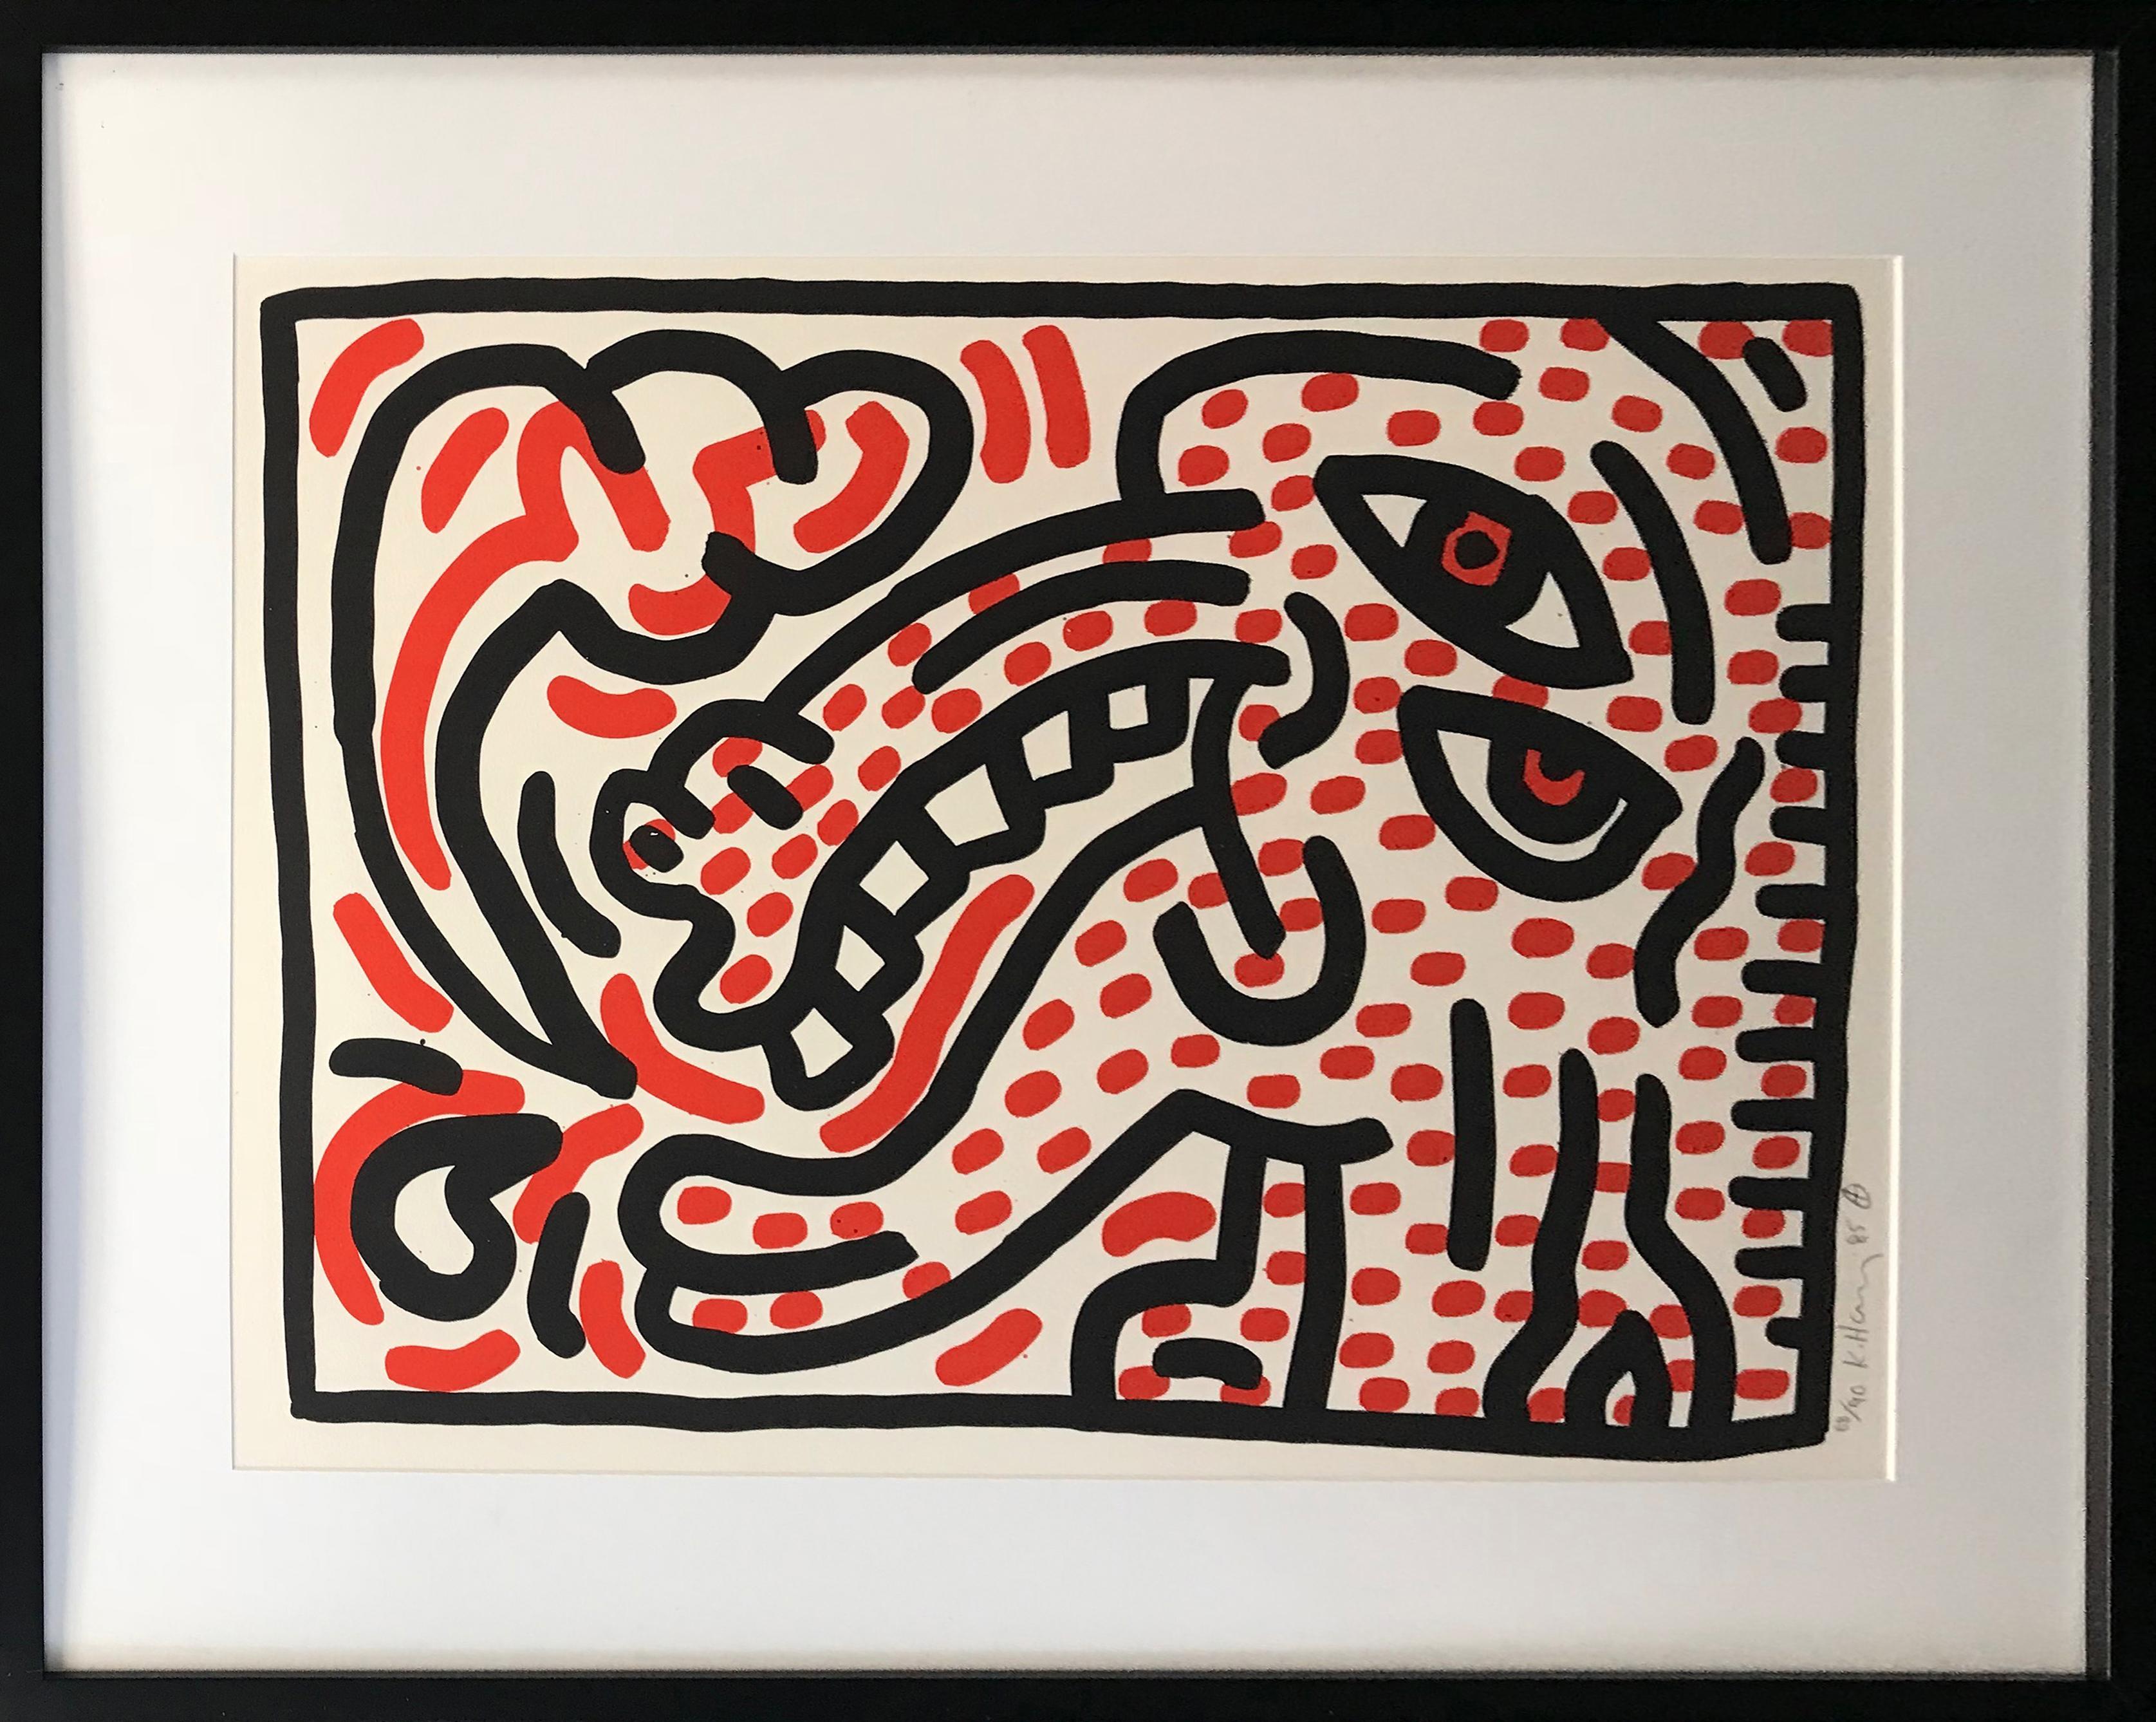 LUDO - Pop Art Print by Keith Haring